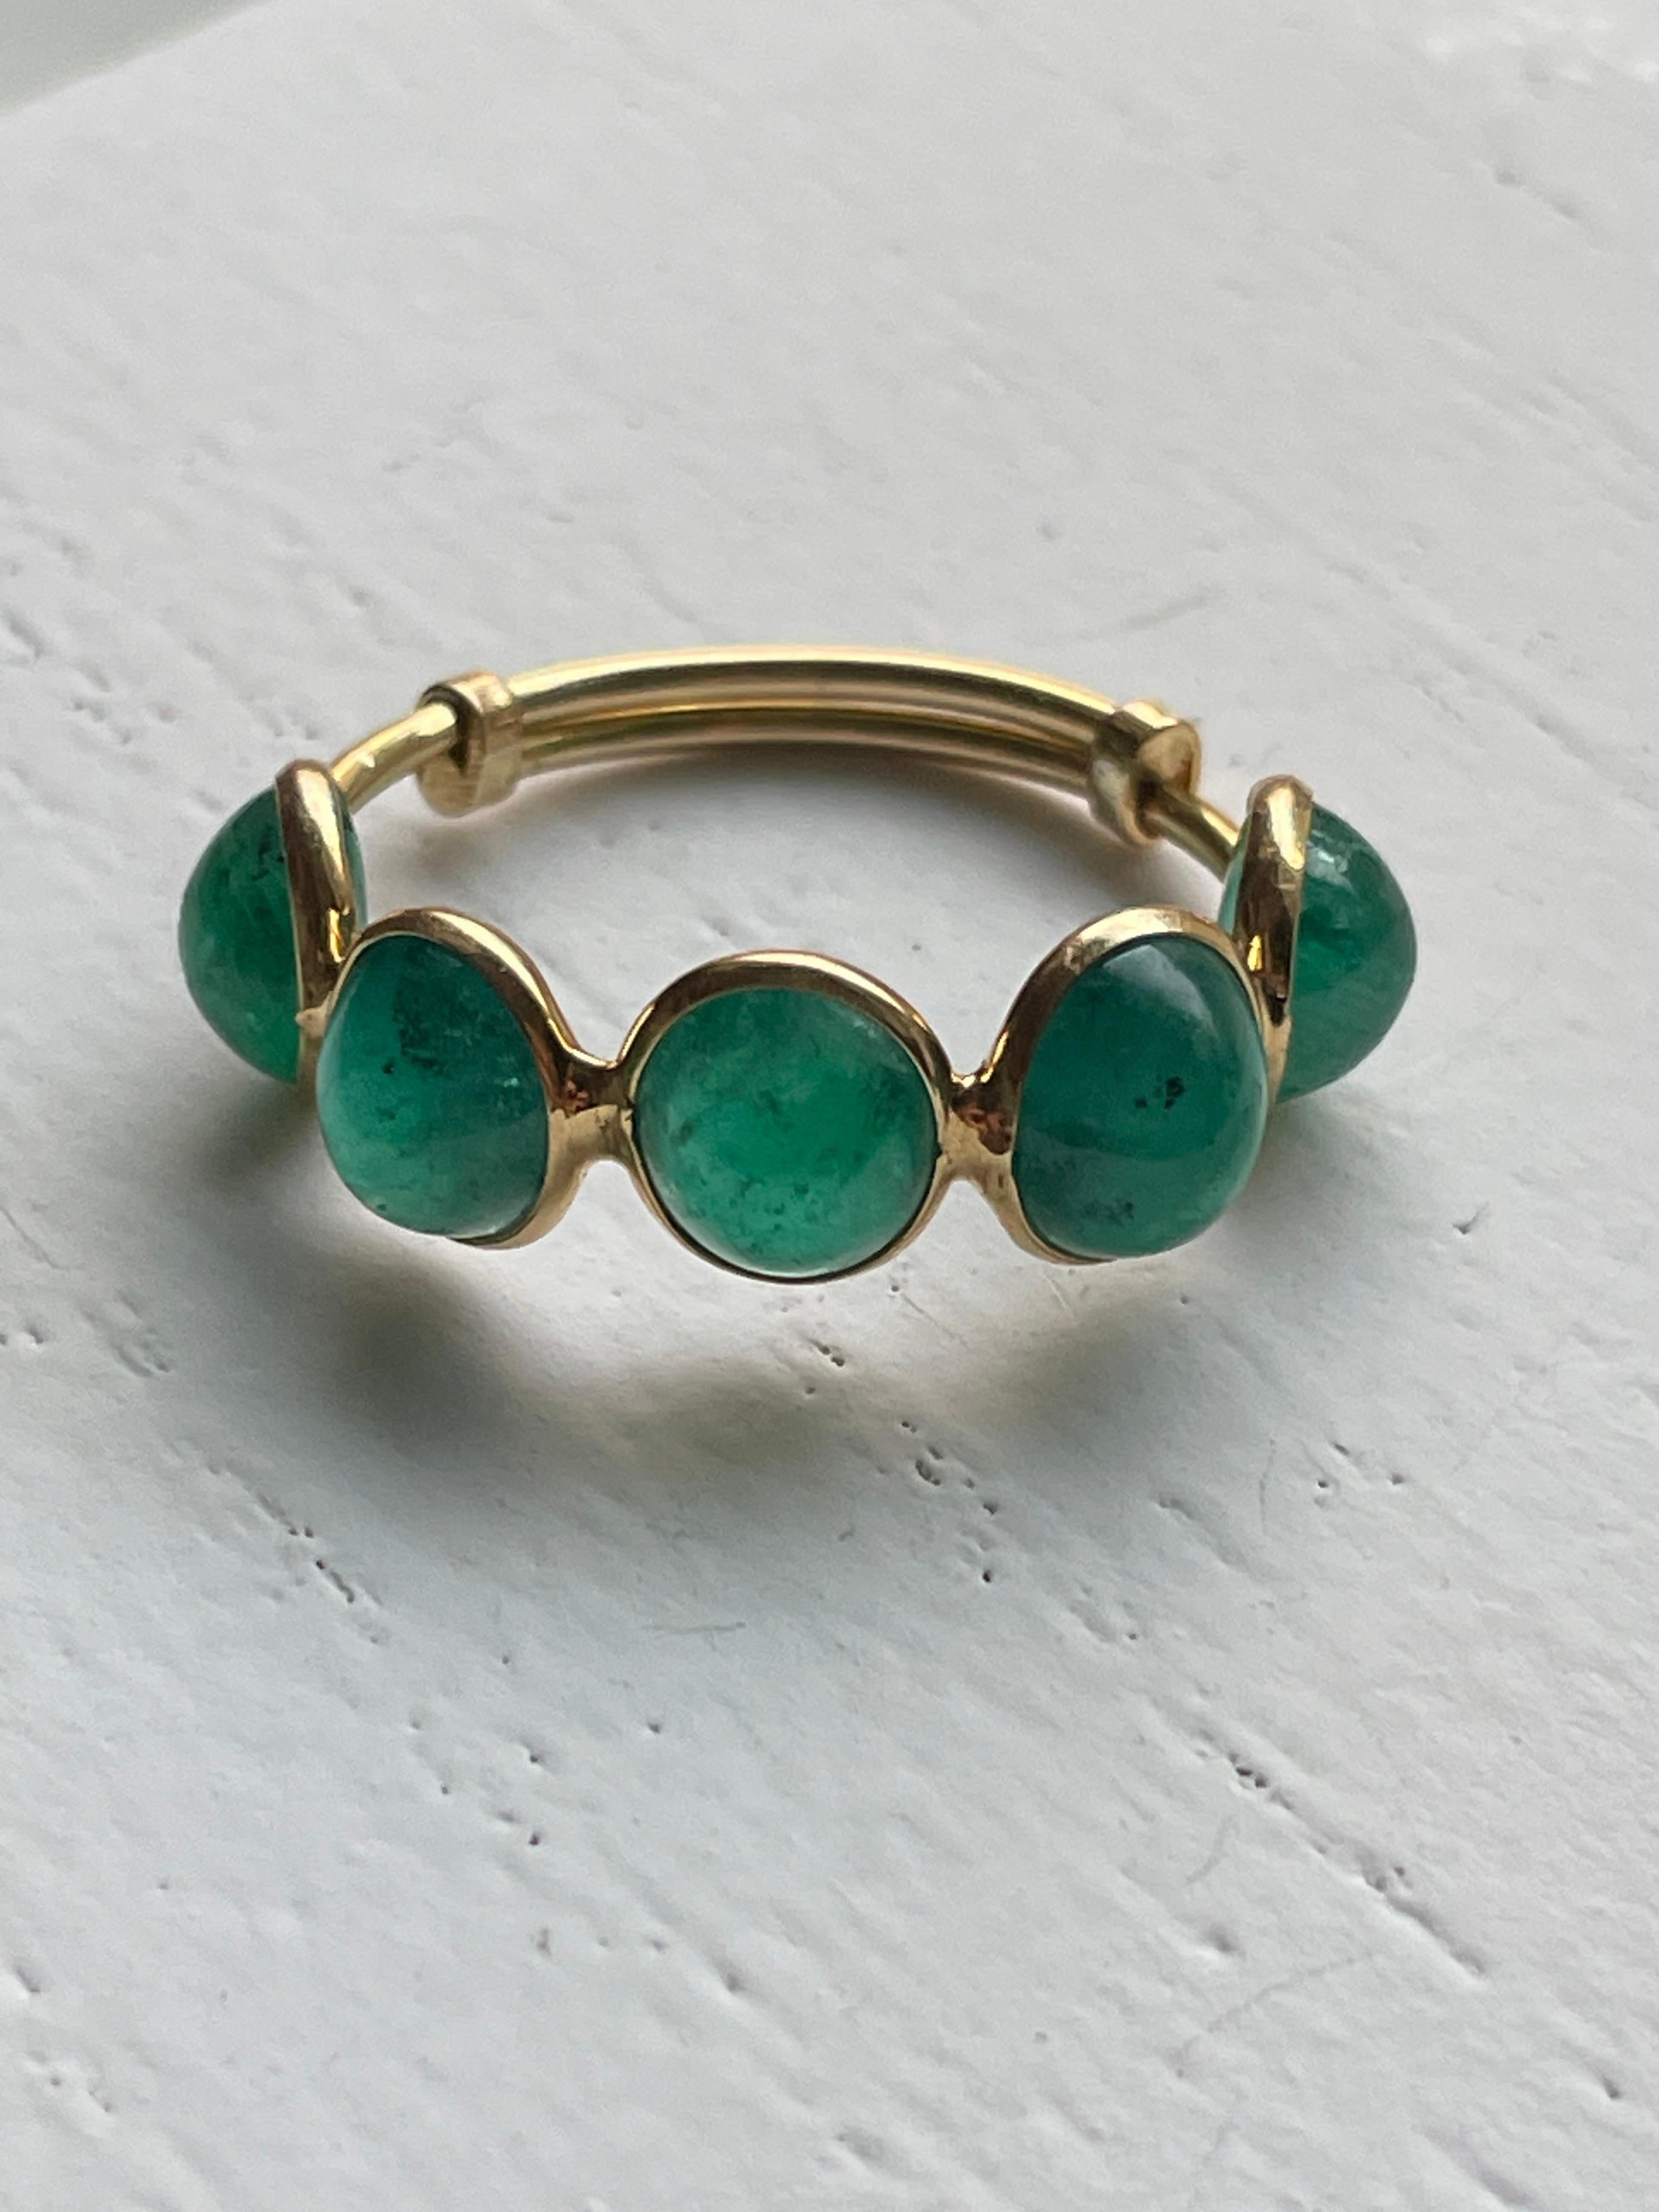 This gorgeous 18K Gold Cabochon Emerald Ring is comprised of 5 Emeralds. The stones are Oval cut and bezel set. When held to the light you will notice natural imperfections in the stones. These emeralds are ethically sourced in Colombia and hand set